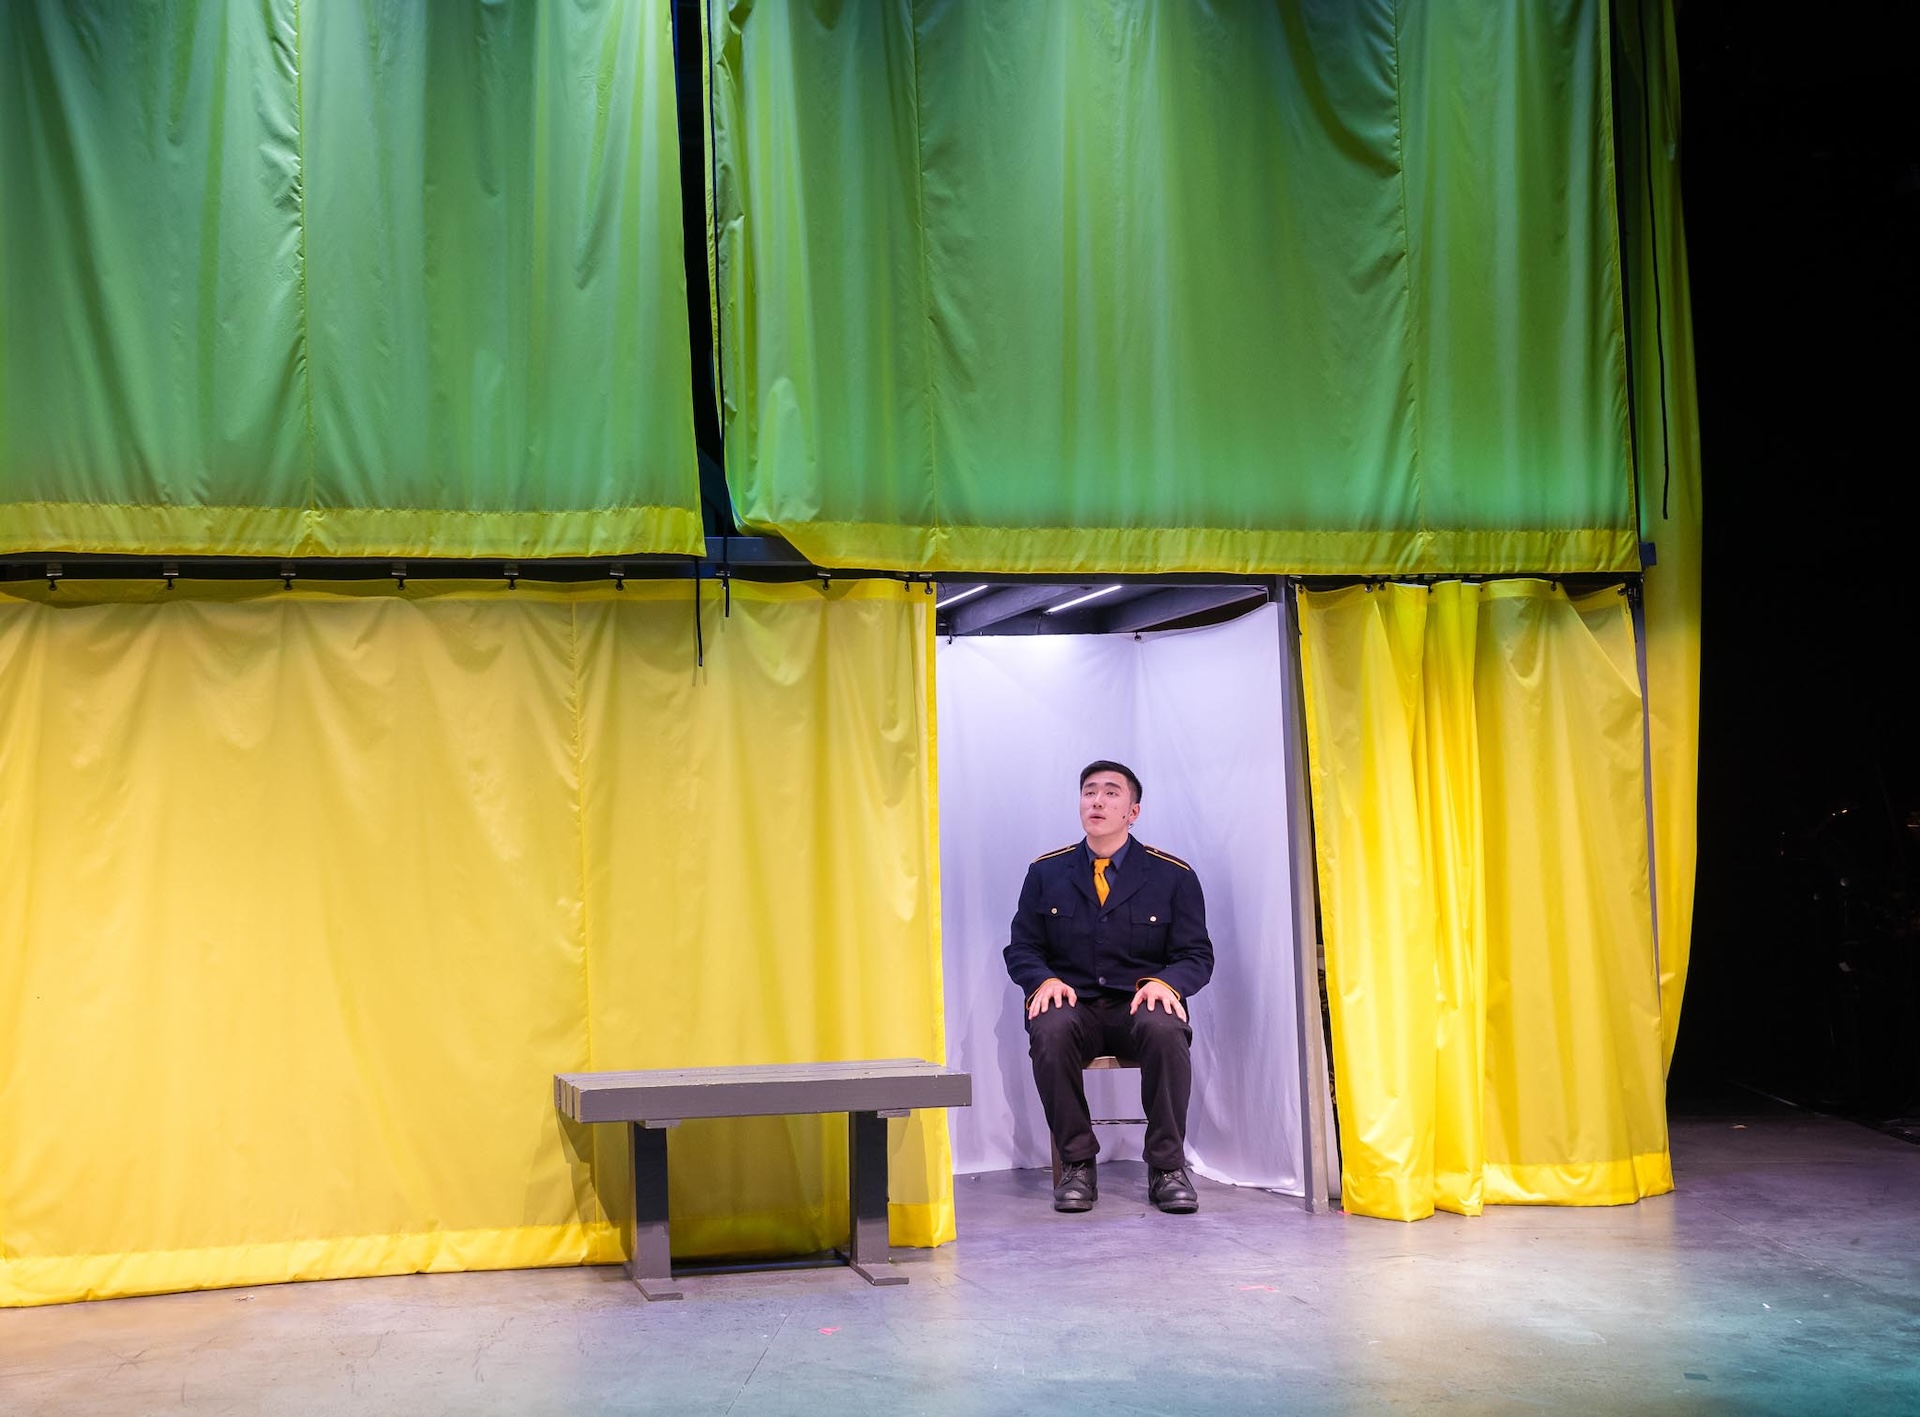 Image of set on stage. There is a wall with two coloured panels, green on top and yellow on the bottom. With a gap in the yellow section and you can see an actor sitting on a seat